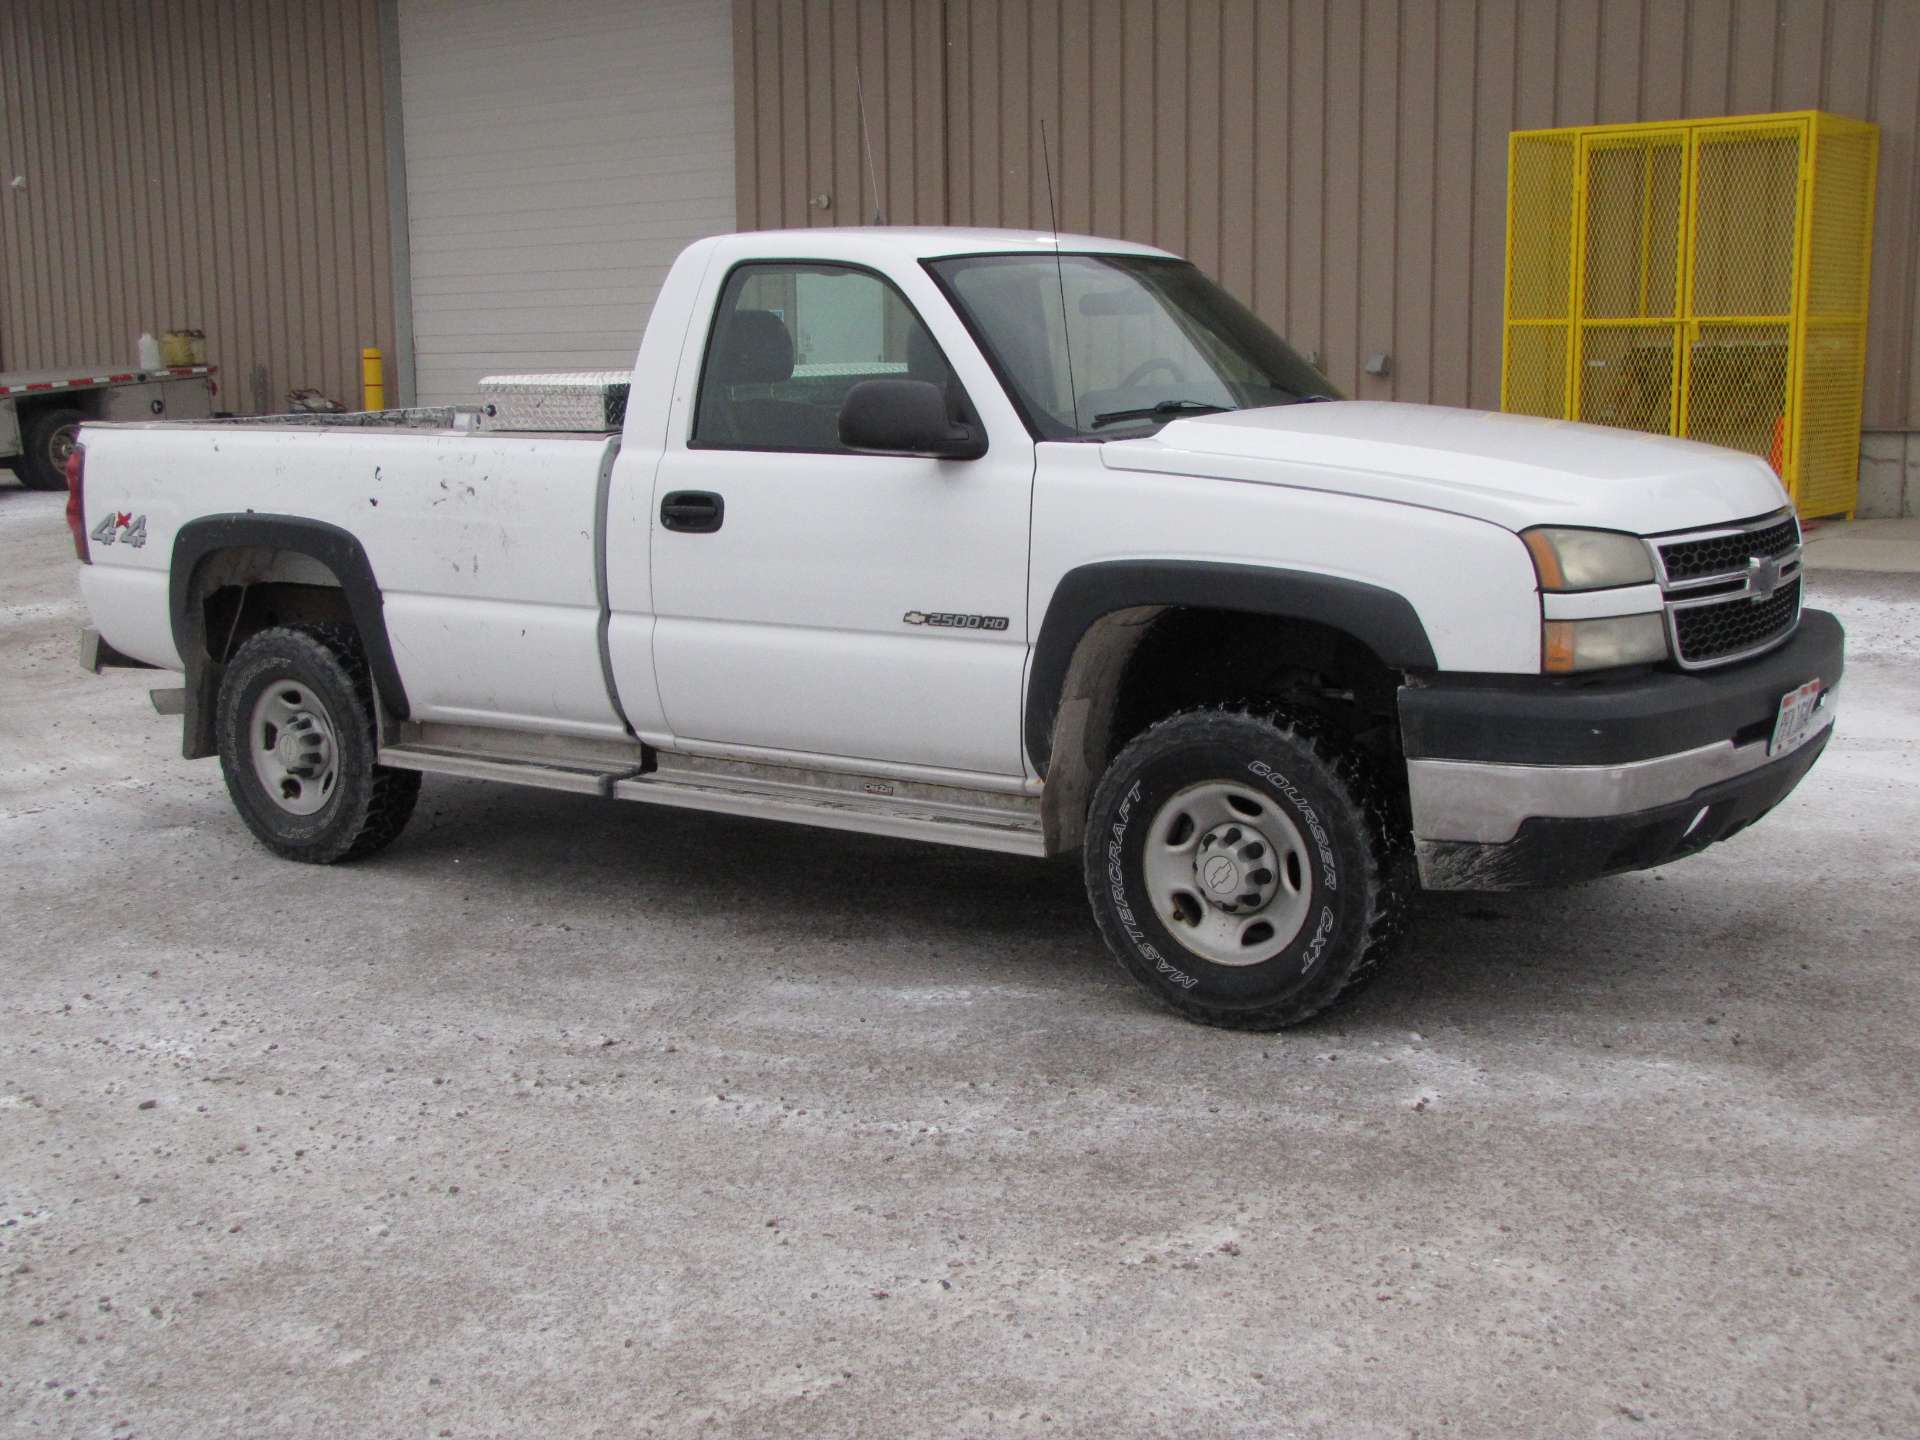 2006 Chevy 2500 HD pickup truck - Image 2 of 63